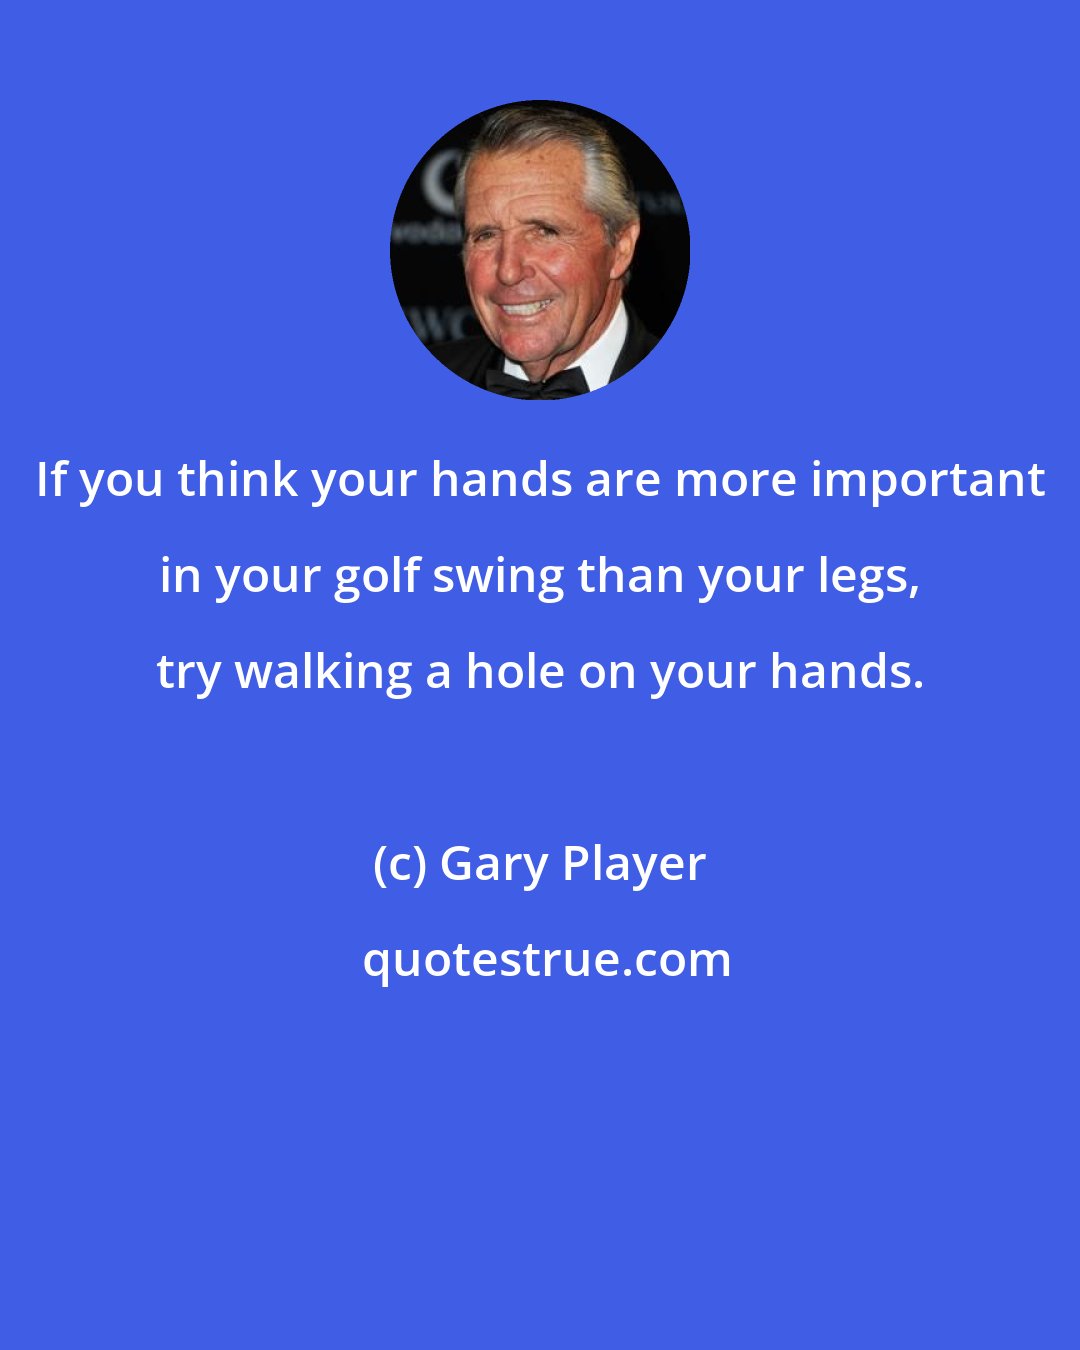 Gary Player: If you think your hands are more important in your golf swing than your legs, try walking a hole on your hands.